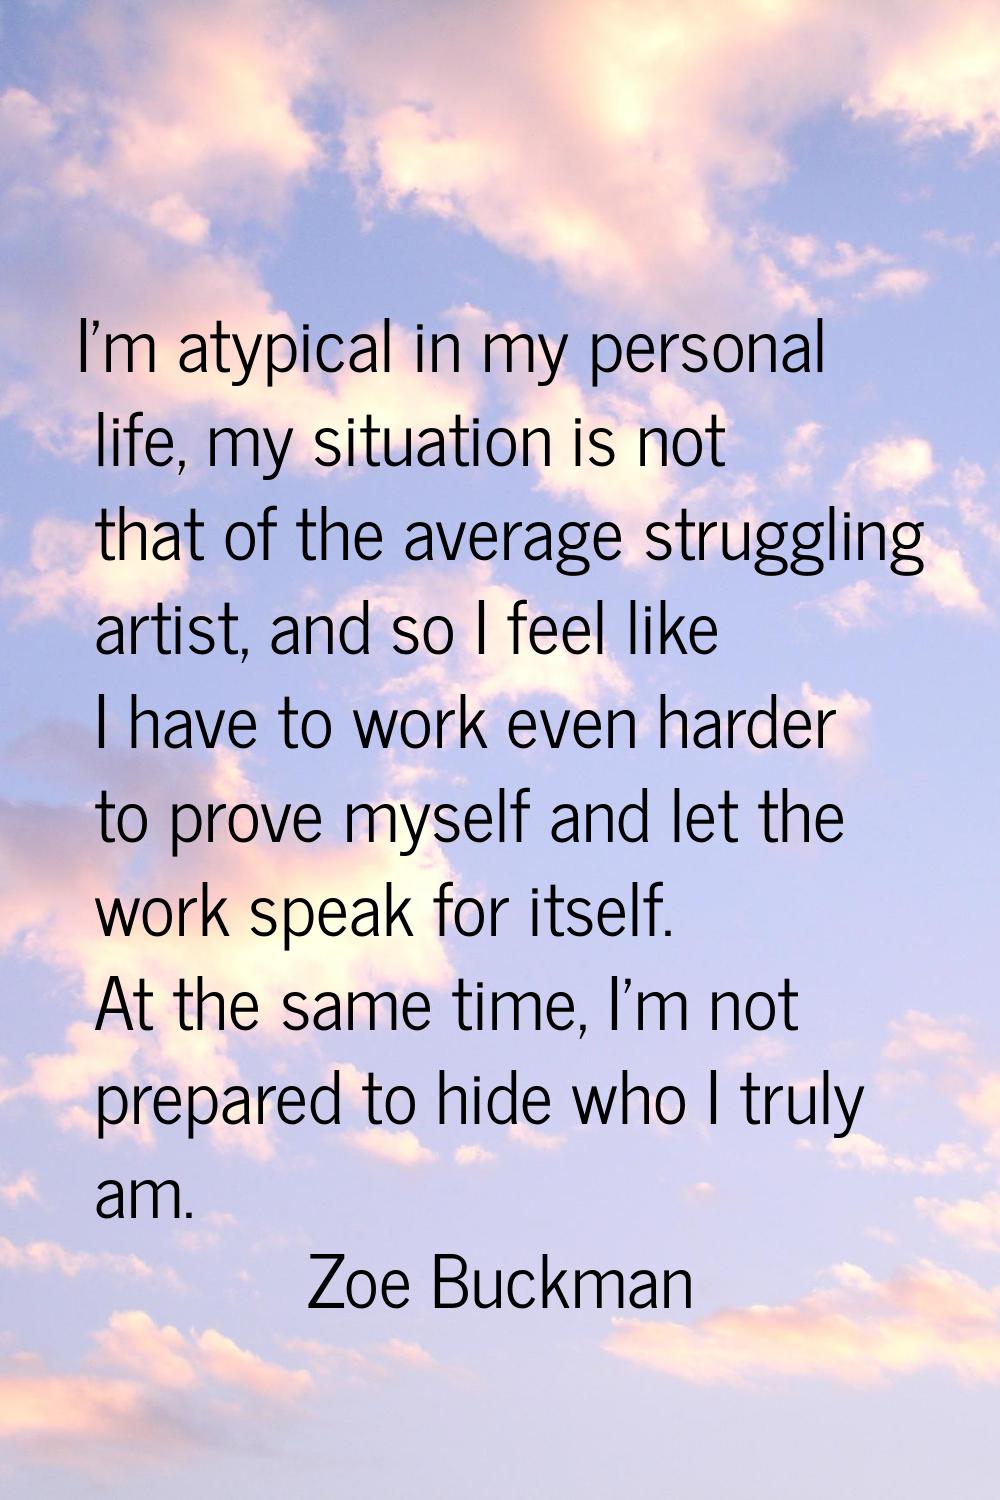 I'm atypical in my personal life, my situation is not that of the average struggling artist, and so